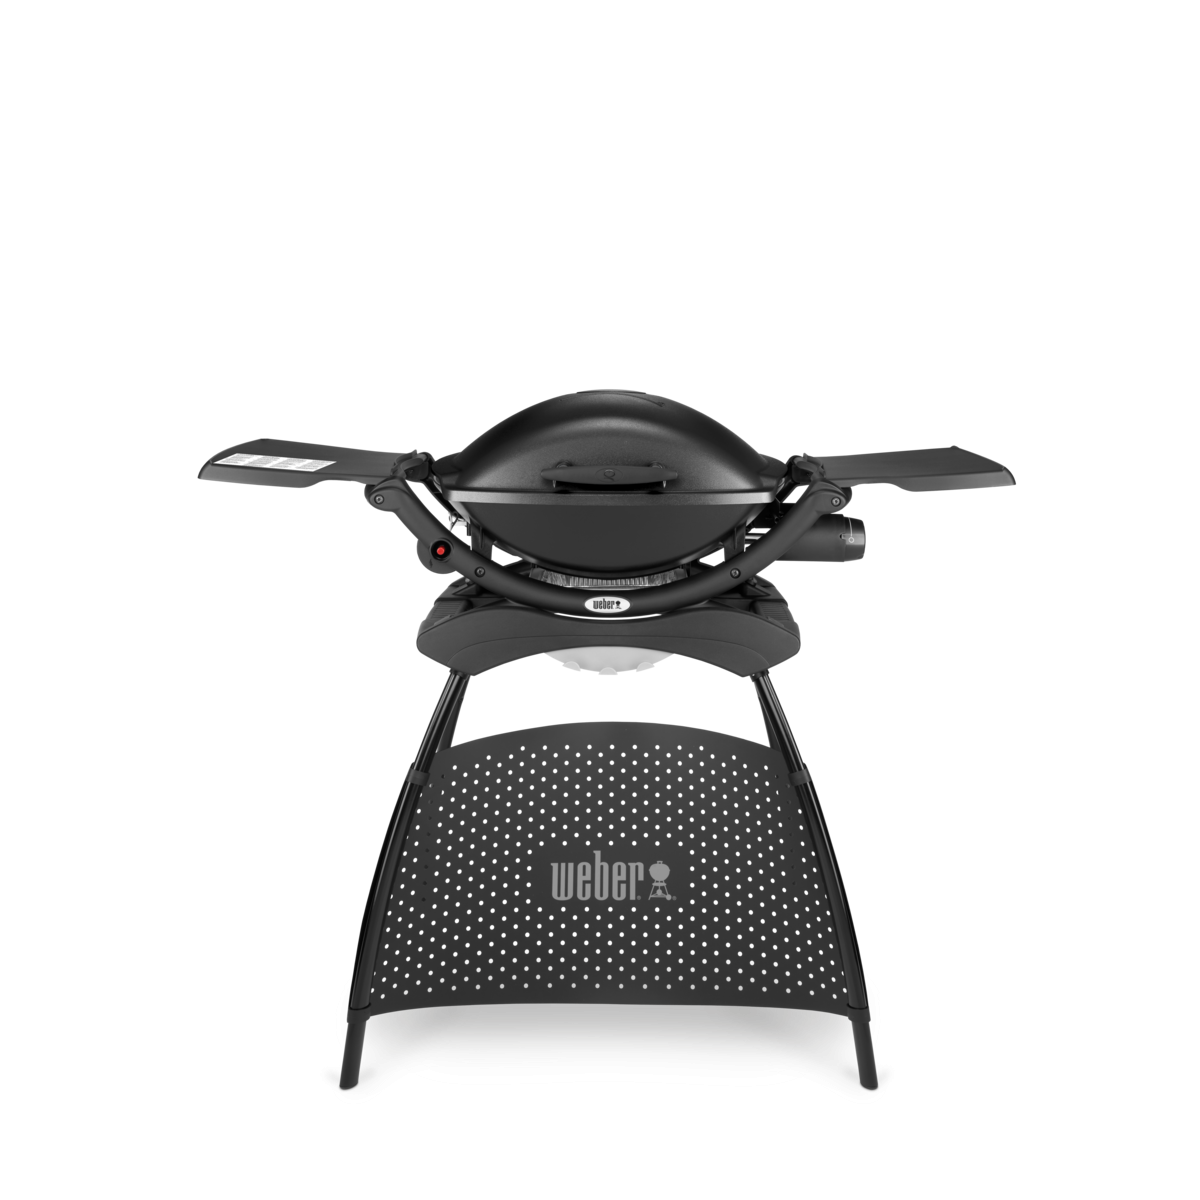 WEBER Q2000 gas grill with stand, black, 53010369